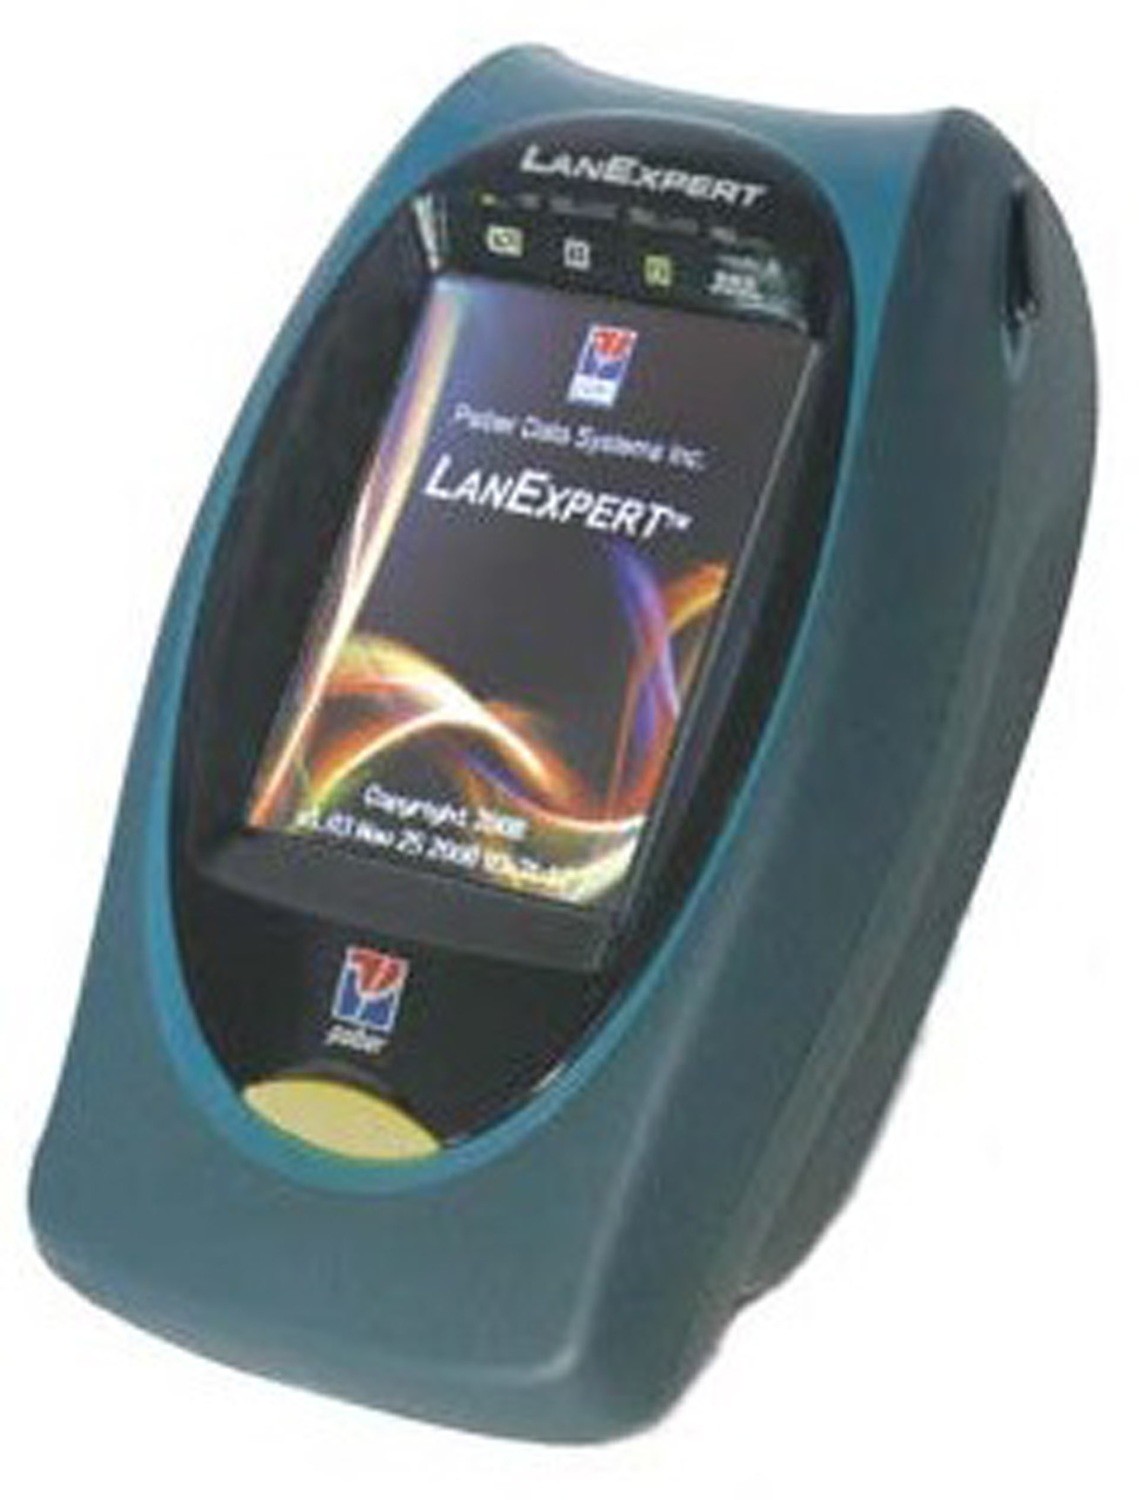 LanExpert 80 Cable and Network Analyzers